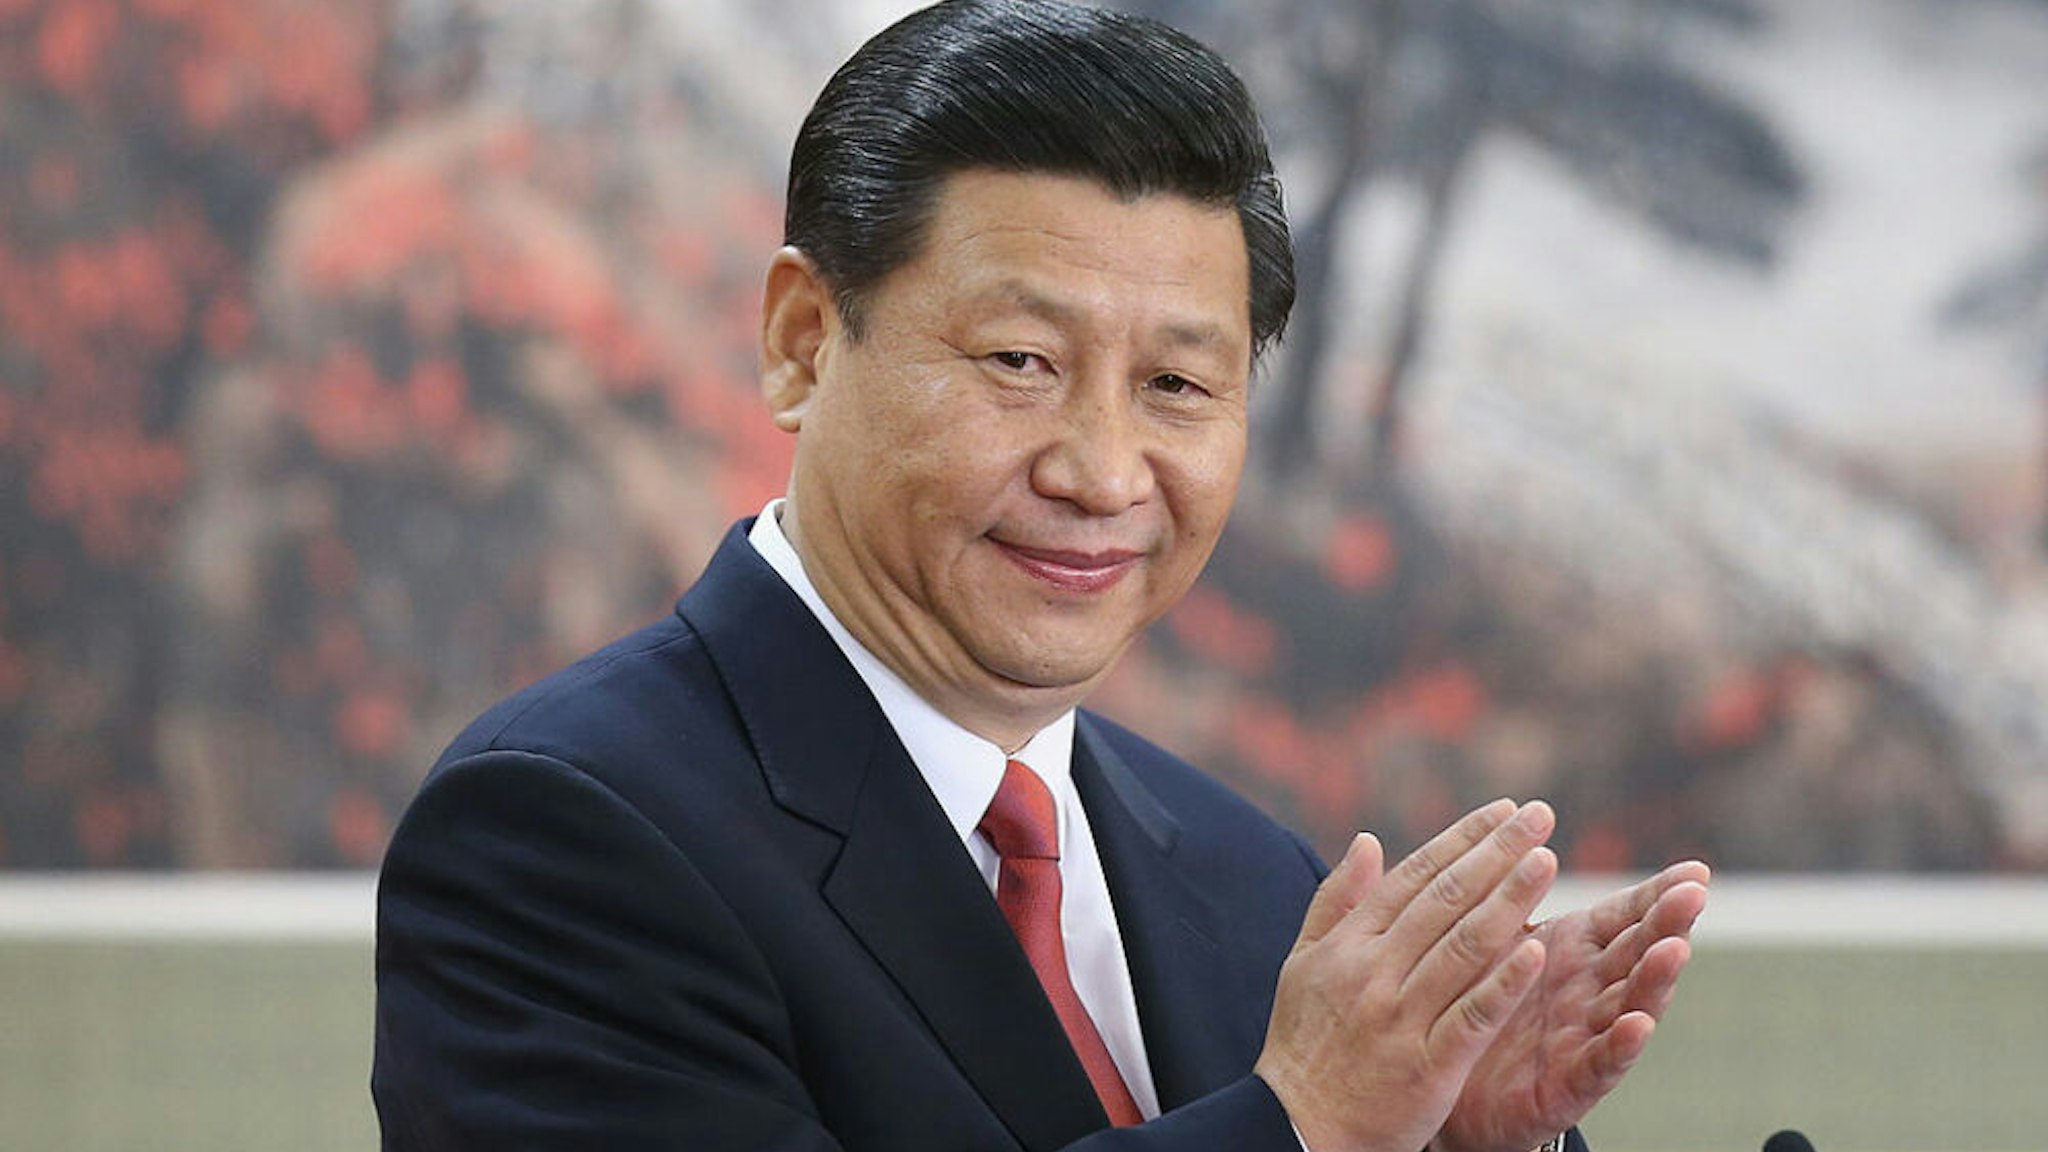 BEIJING, CHINA - NOVEMBER 15: Chinese Vice President Xi Jinping, one of the members of new seven-seat Politburo Standing Committee, greets the media at the Great Hall of the People on November 15, 2012 in Beijing, China. China's ruling Communist Party today revealed the new Politburo Standing Committee after its 18th congress.